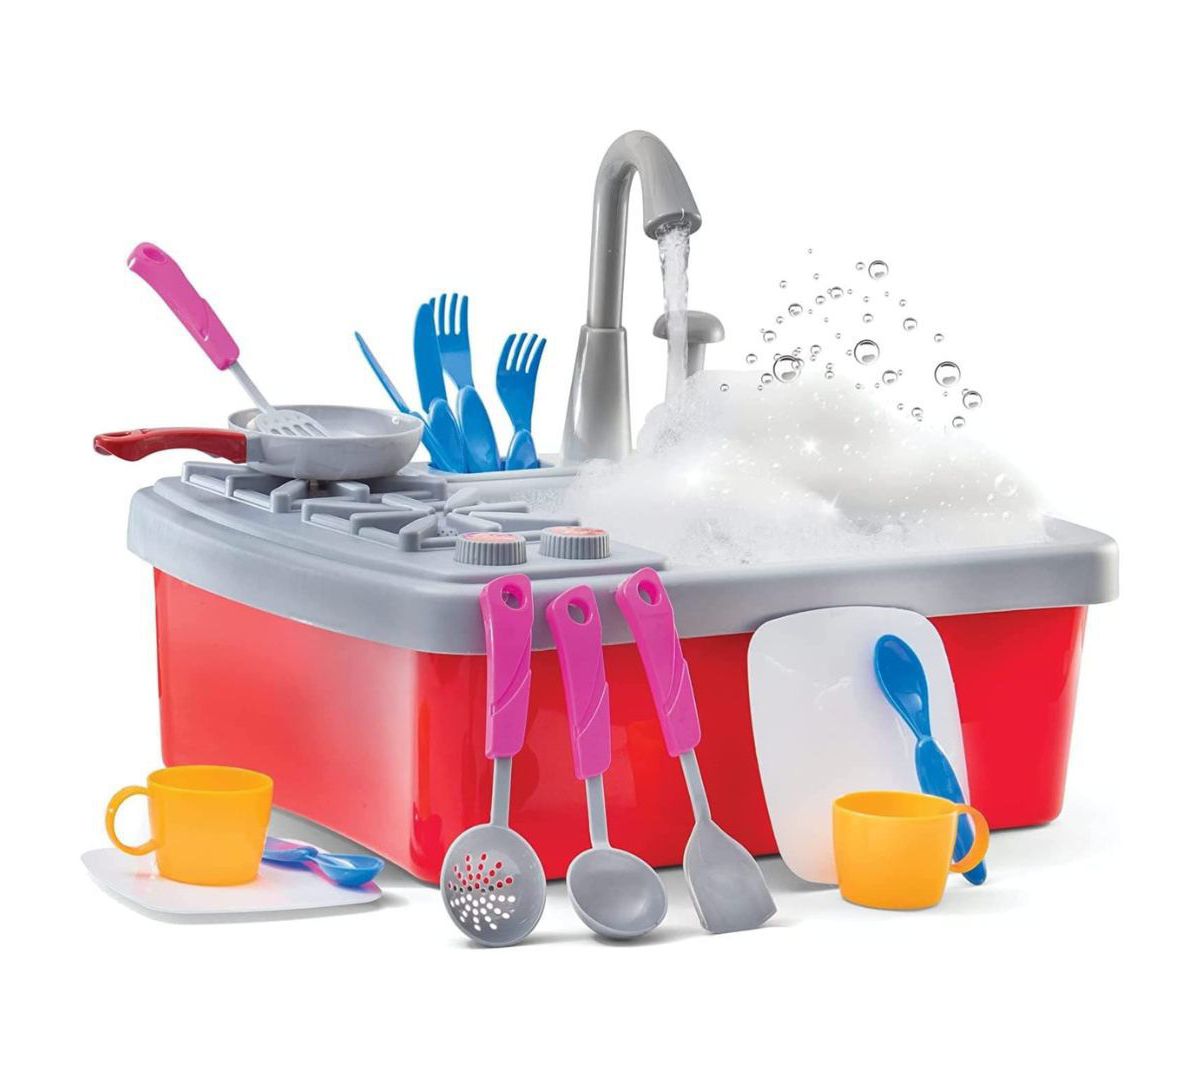 17 Pc Play Sink with Running Water - Kitchen Sink Toy with Real Faucet & Drain, Dishes, Utensils Play22